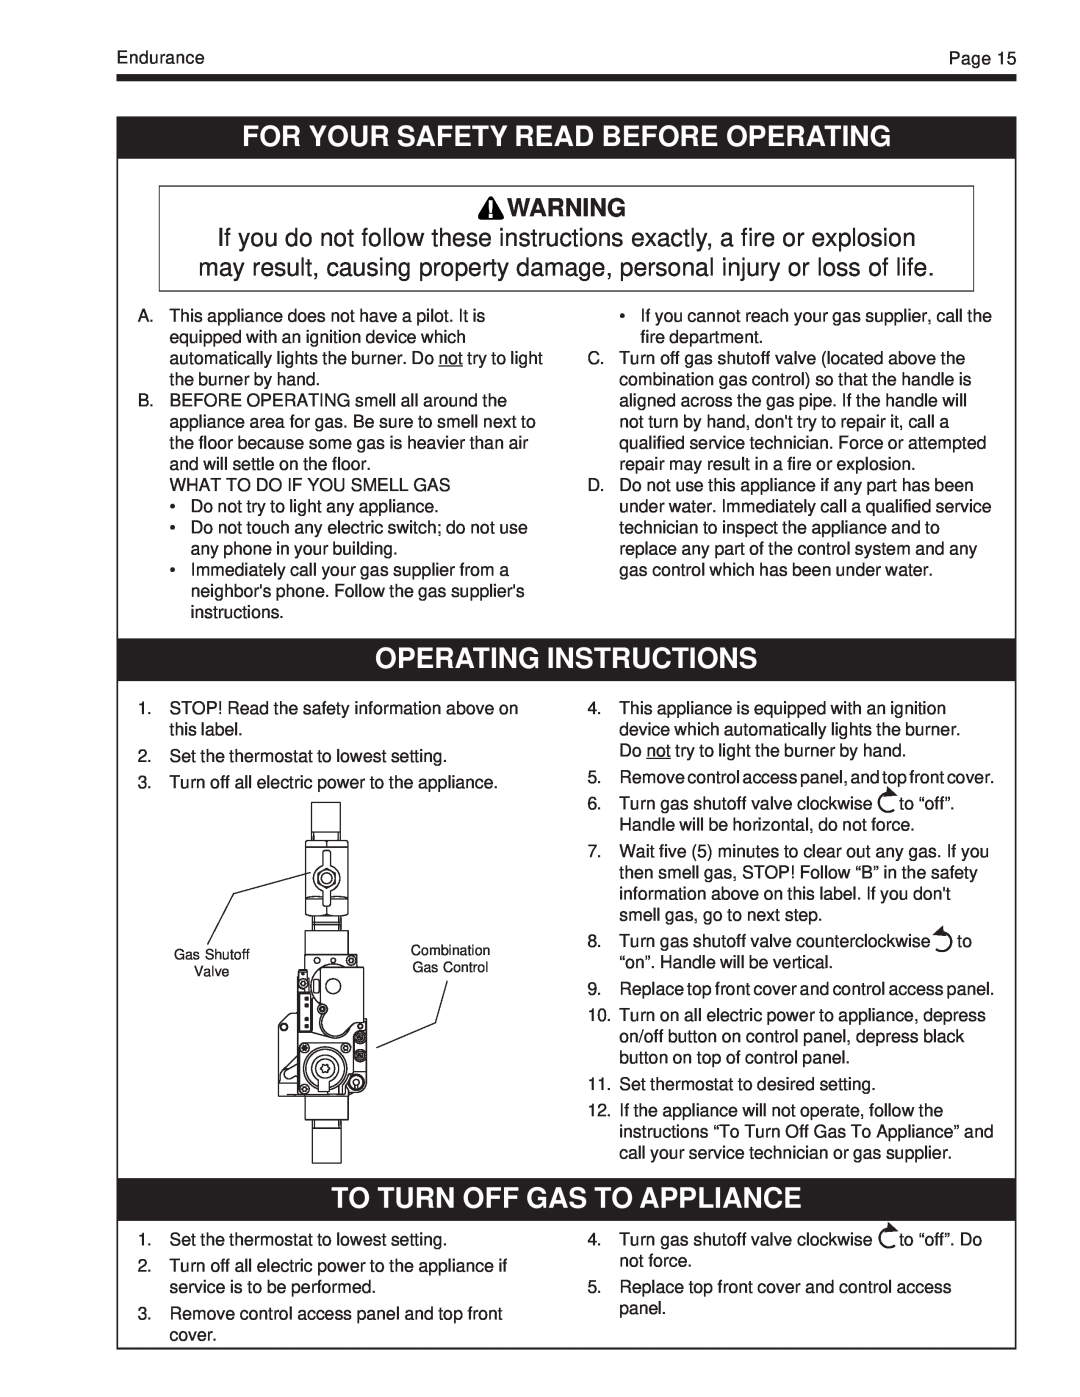 Whirlpool EDP/EDN For Your Safety Read Before Operating, Operating Instructions, To Turn Off Gas To Appliance, Combination 